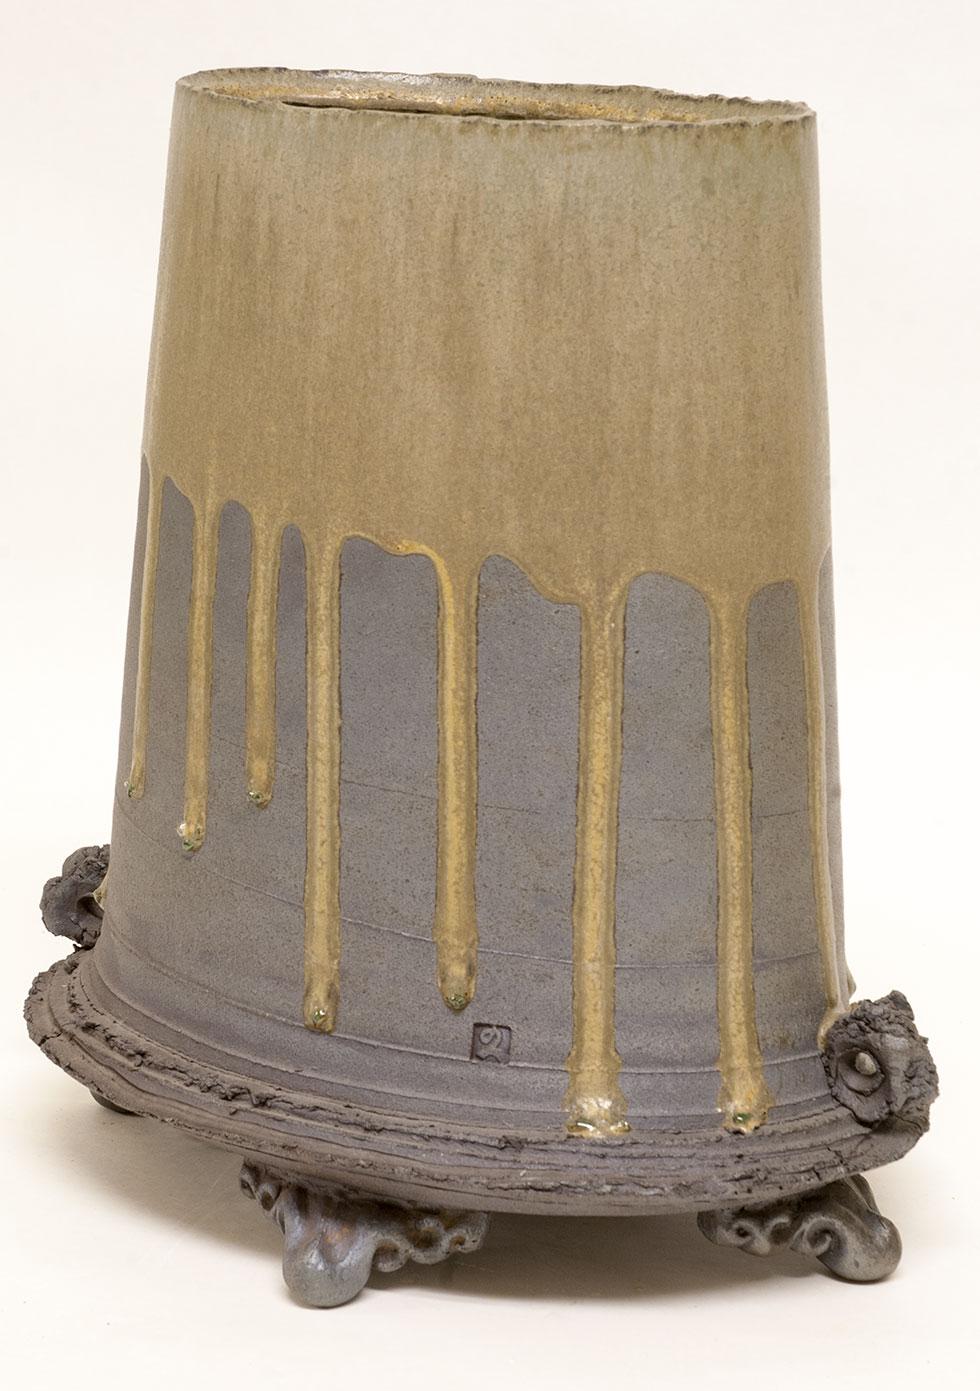 Untitled, 1993, John Neely, reduction cooled stoneware, wheel thrown and altered, 11.625 in x 10.25 in x 8 in (29.5 cm x 26 cm x 20.3 cm), 93.008.1. Gift of the artist.